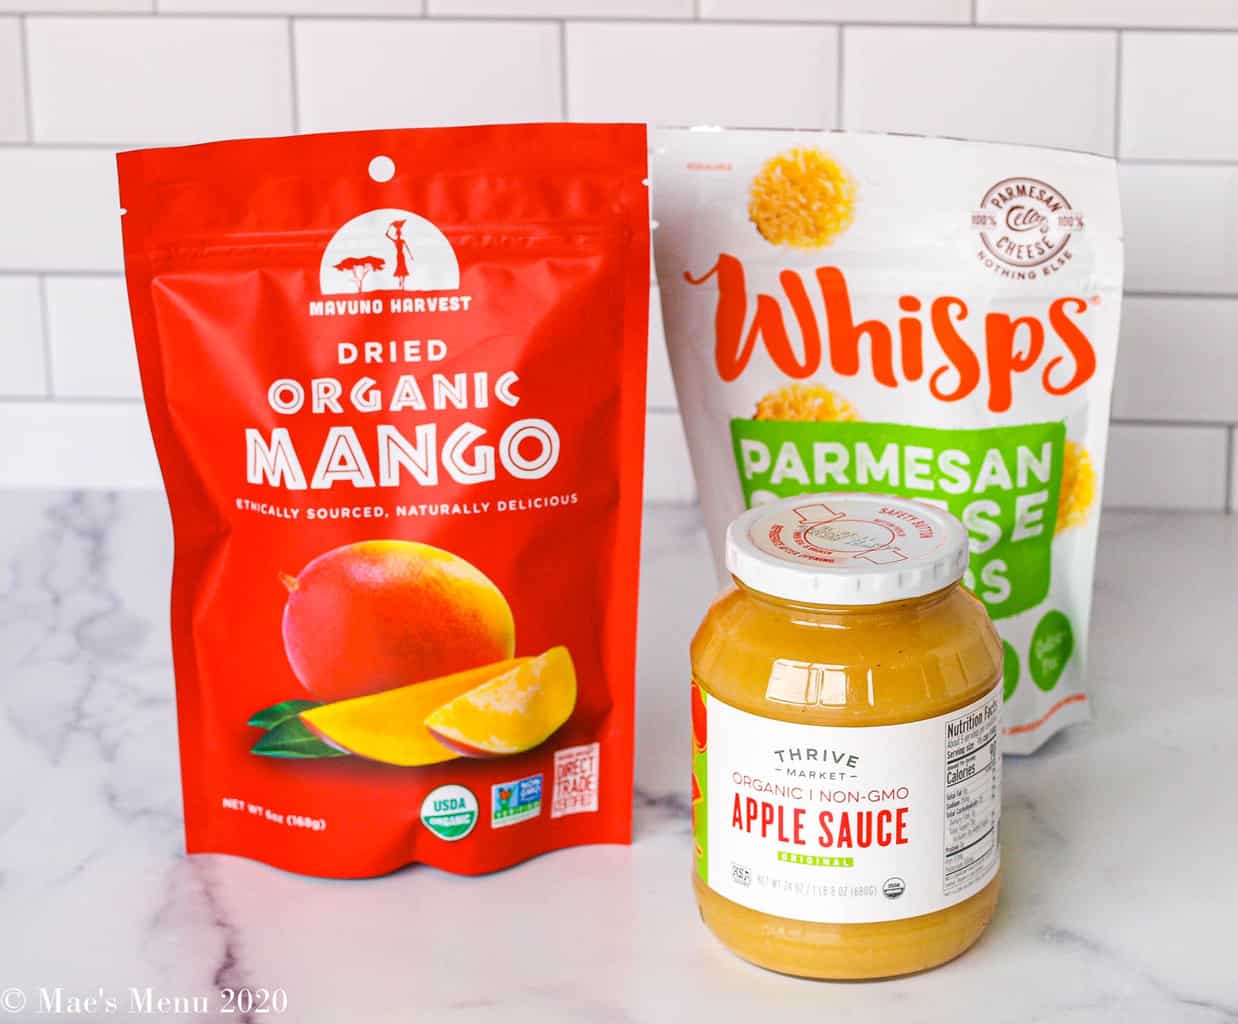 Snacks from thrive market on the counter: a bag of mangoes, a bottle of applesauce, and a bag of parmesan cheese whisps